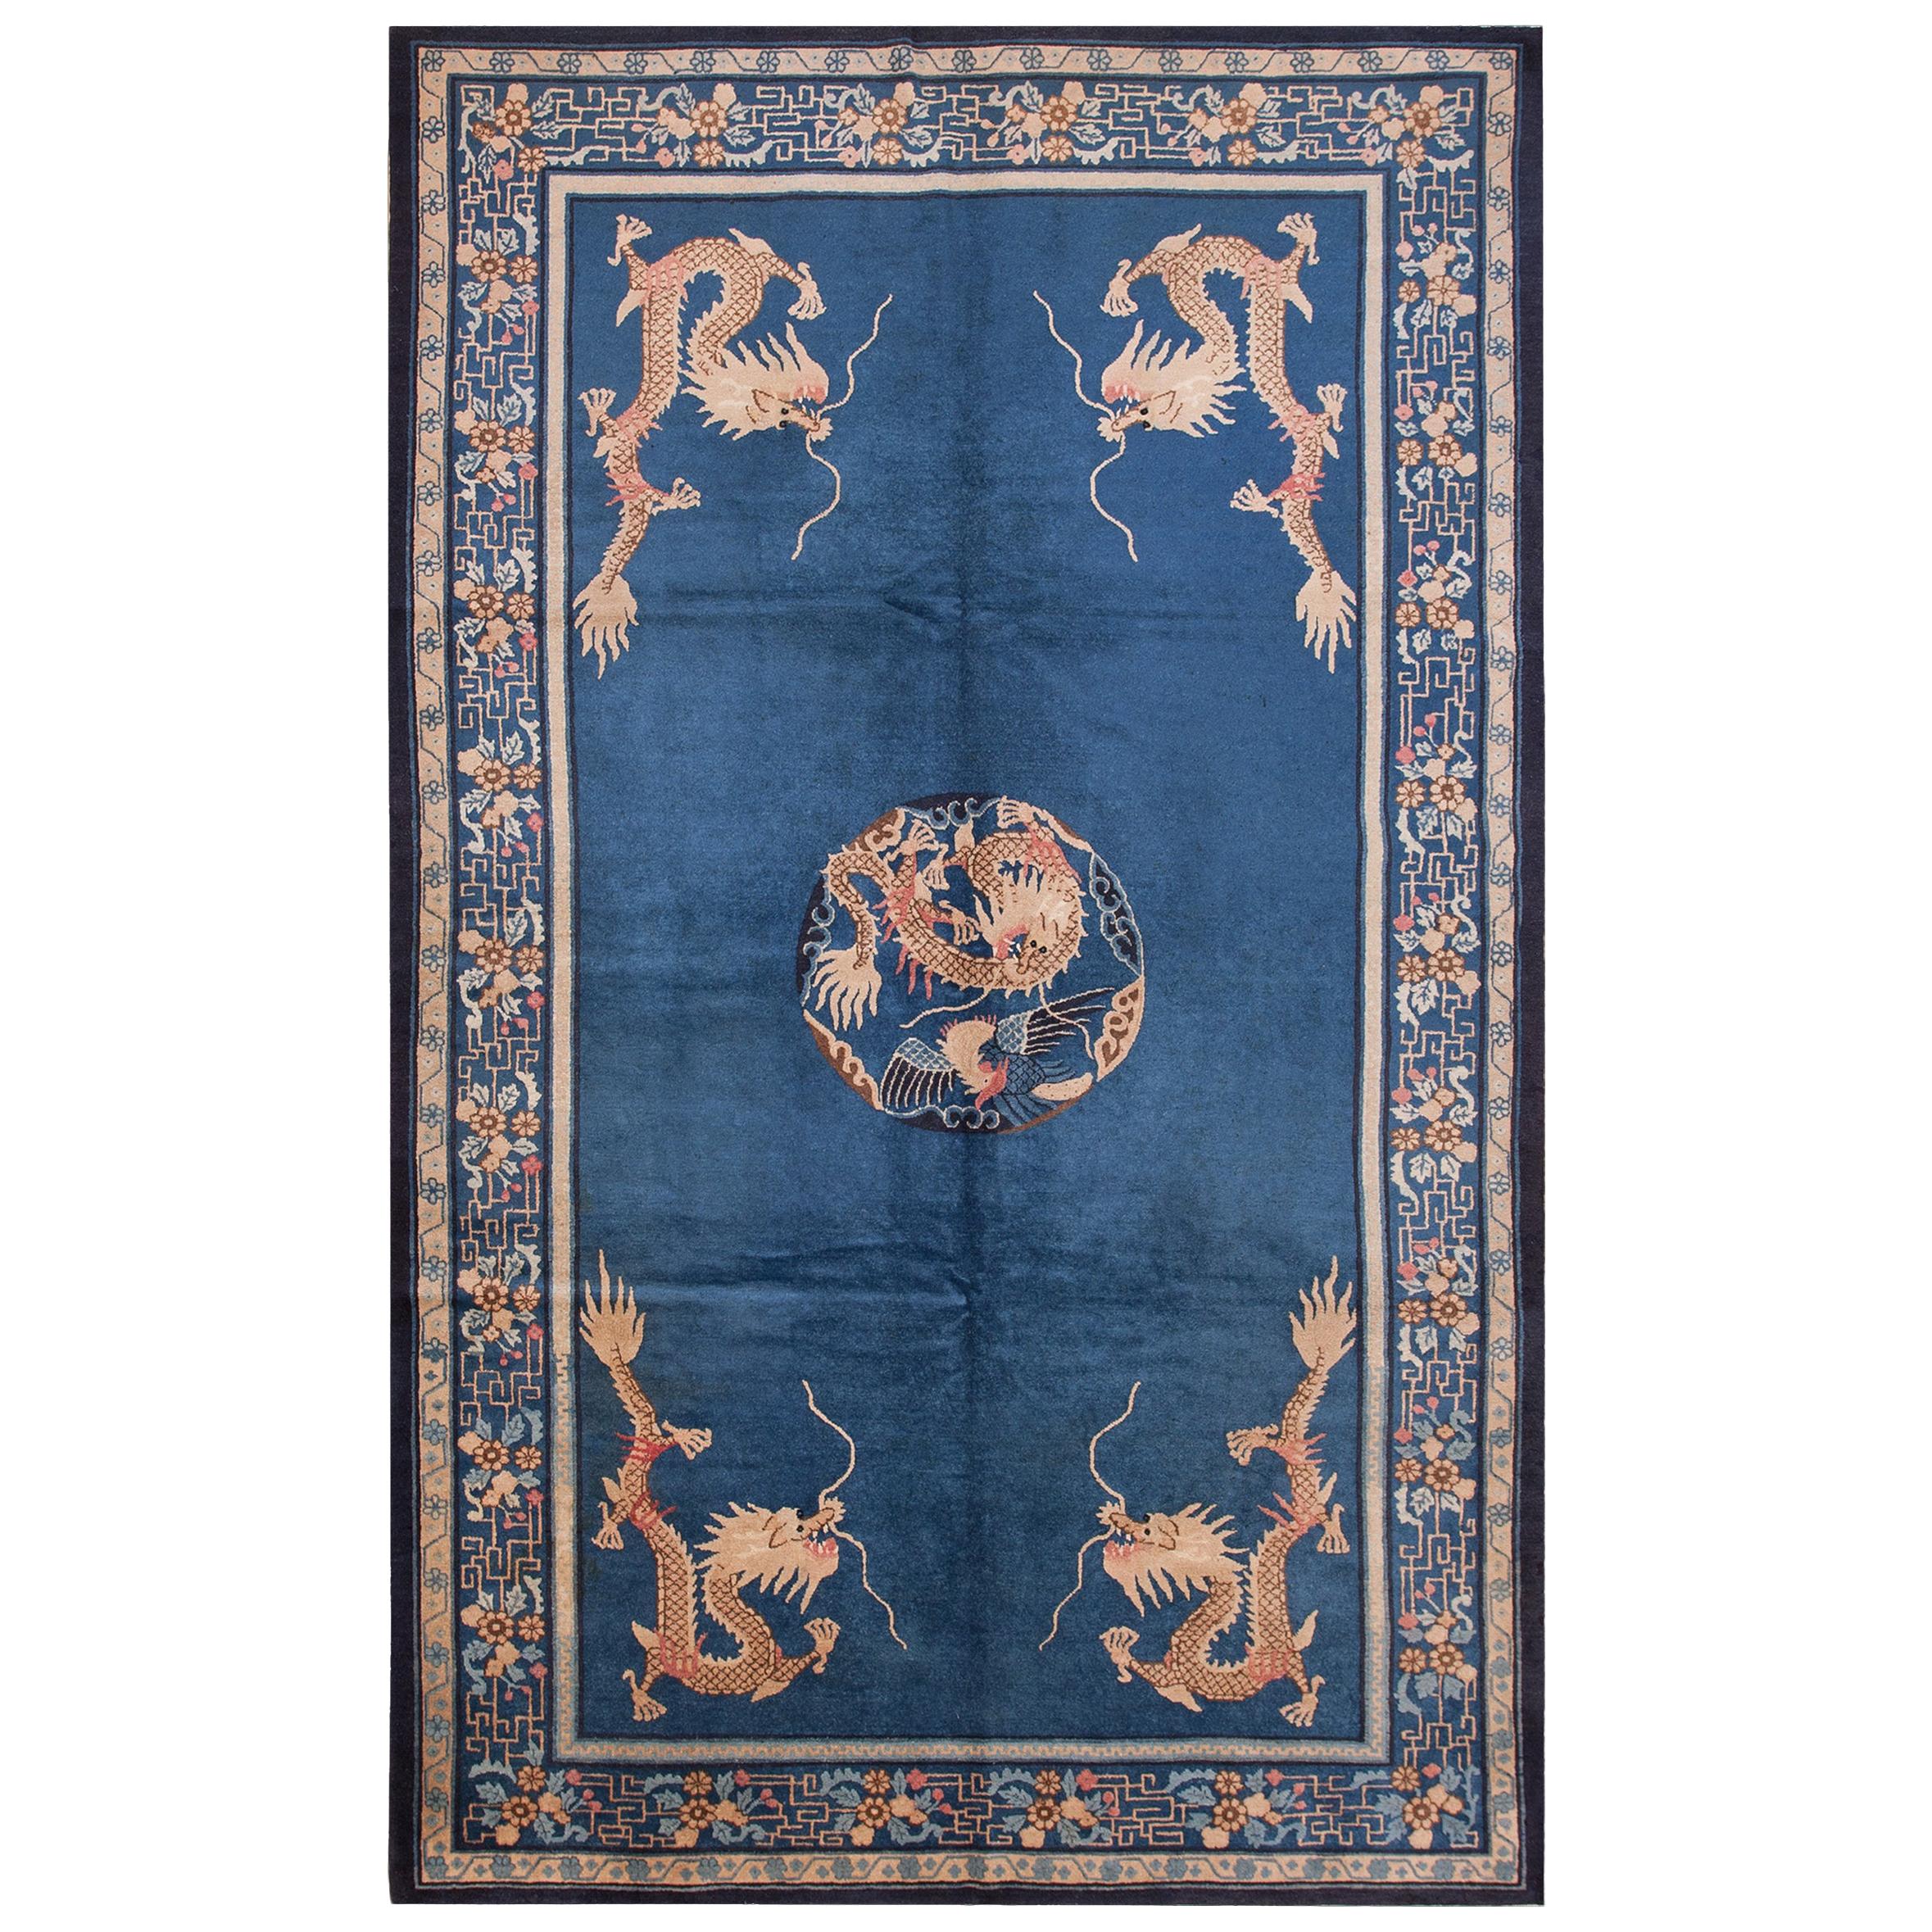 Early 20th Century Chinese Peking Dragon Carpet ( 7' x 11'8" - 213 x 356 ) For Sale